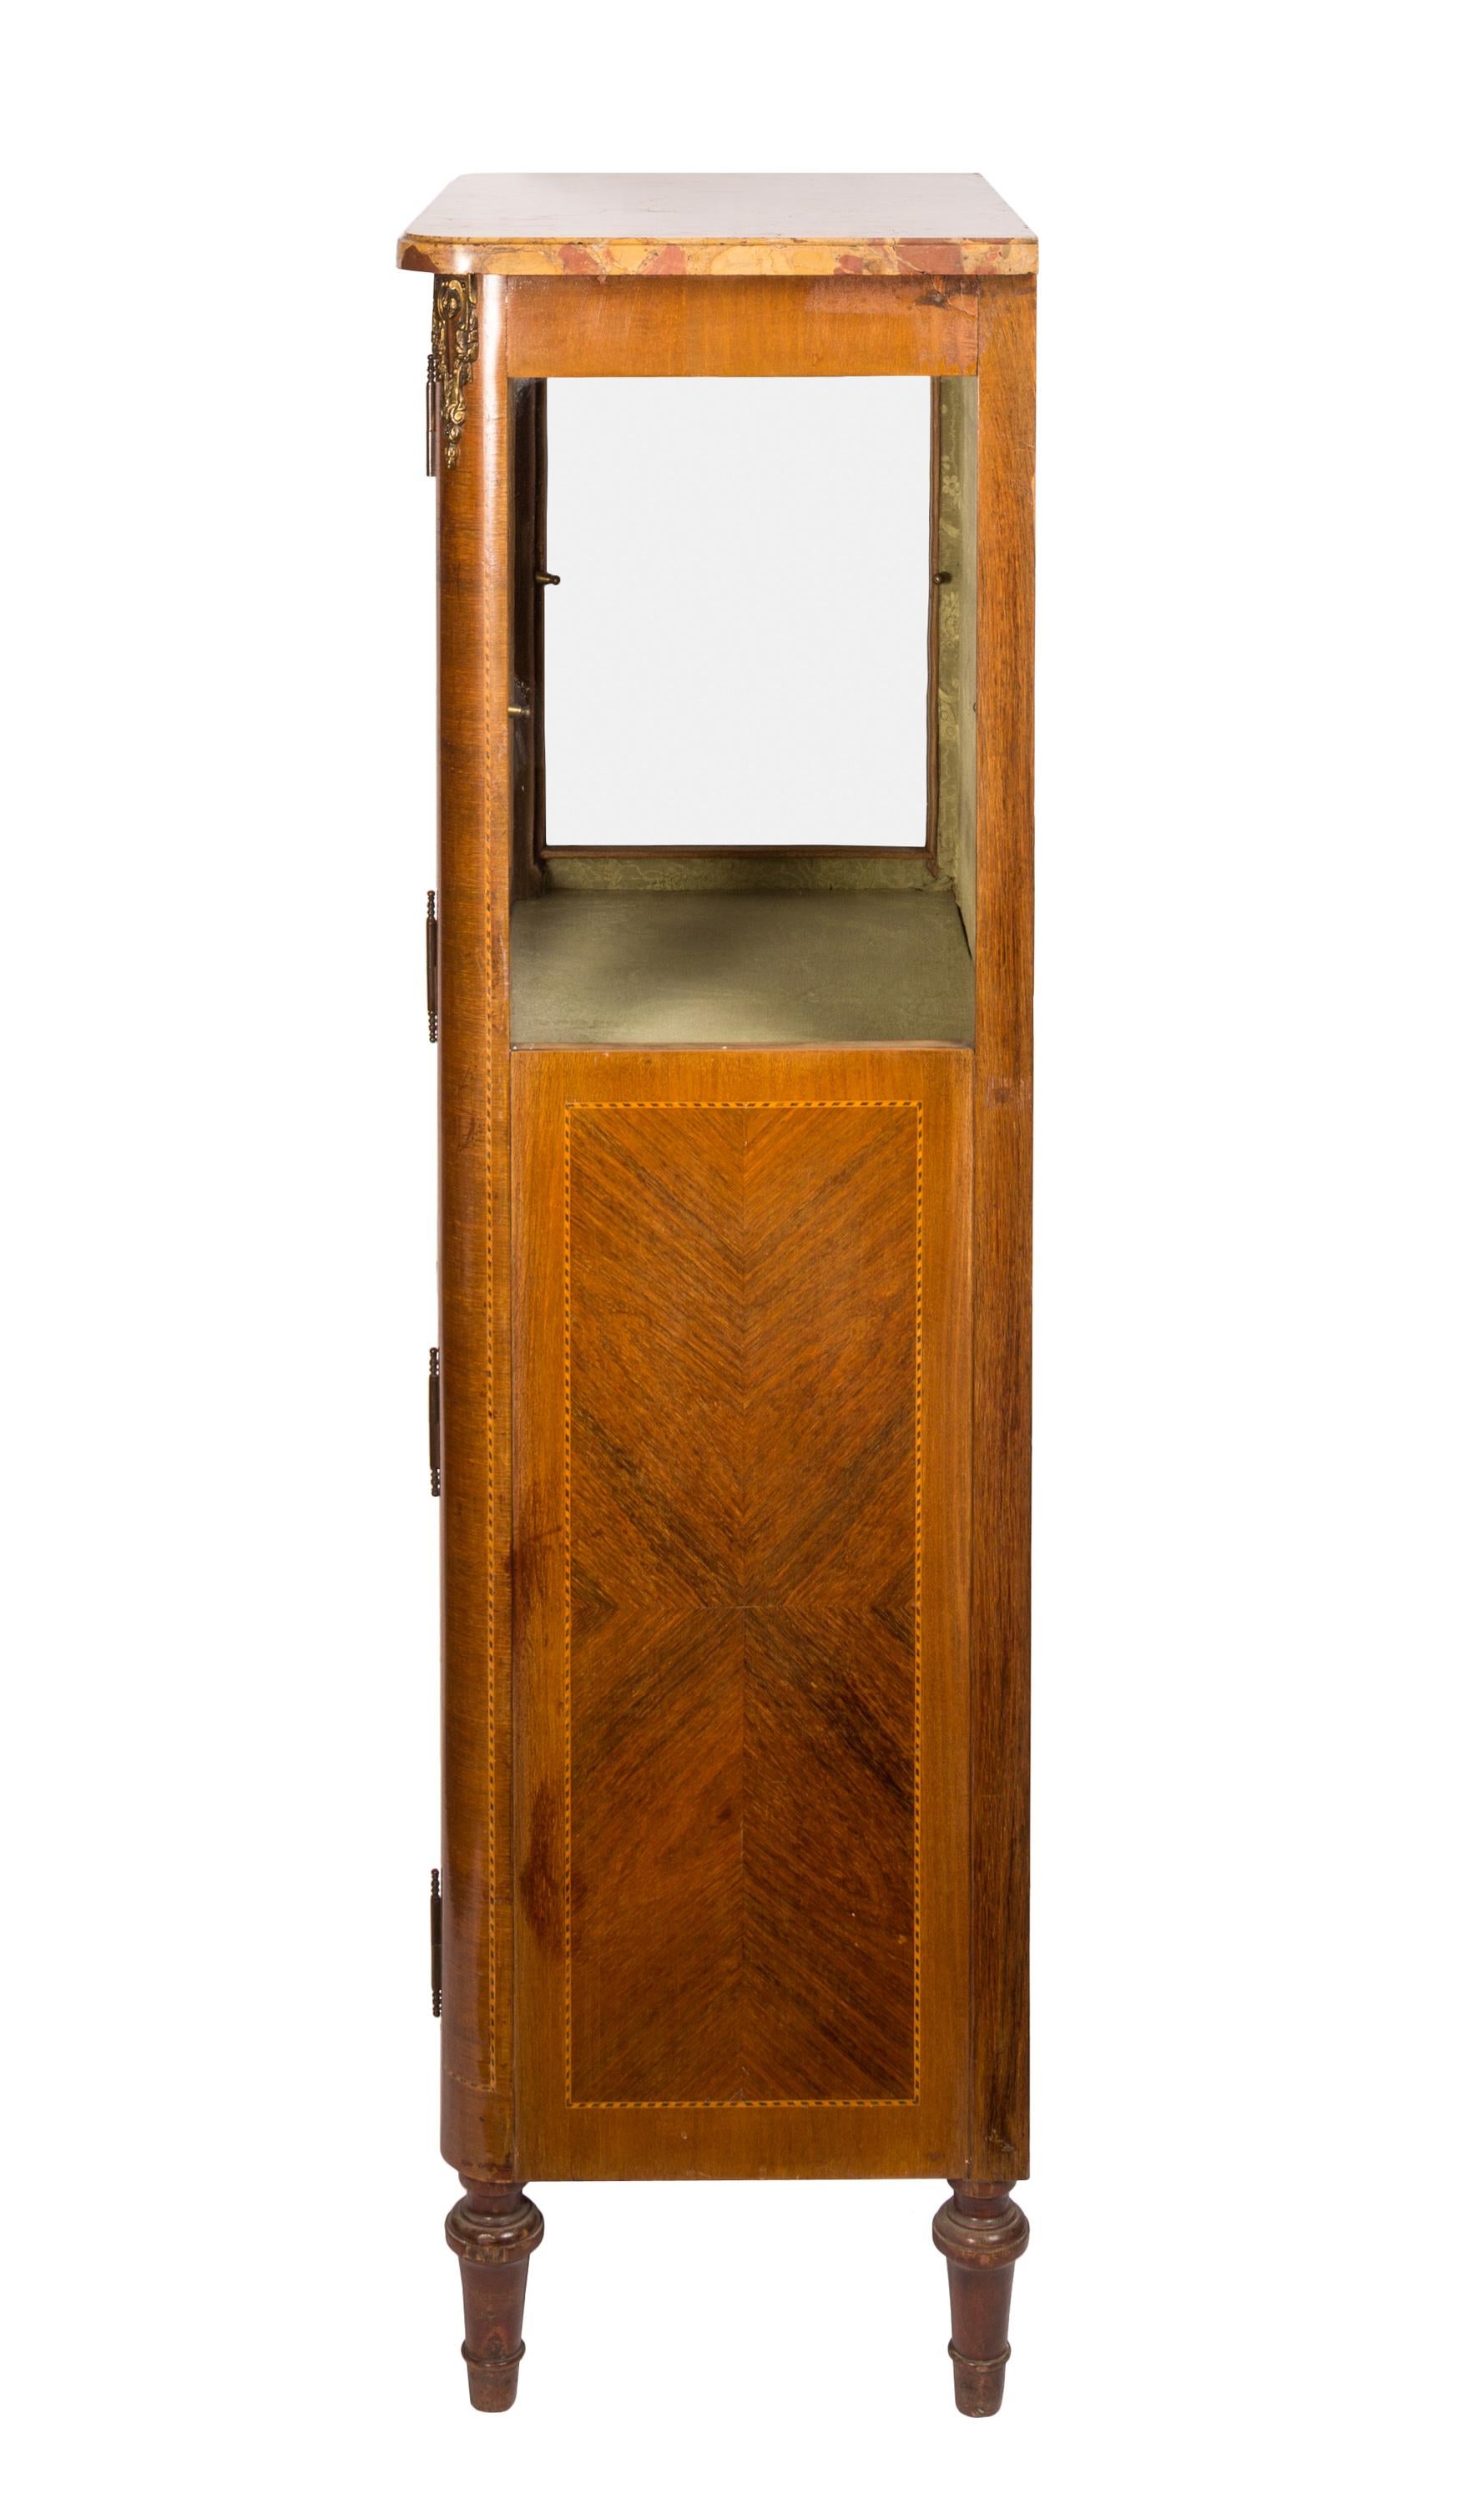 19th Century Small Louis XVI Style Vitrine with Marquetry, Ormolu Hardware and Marble Top For Sale